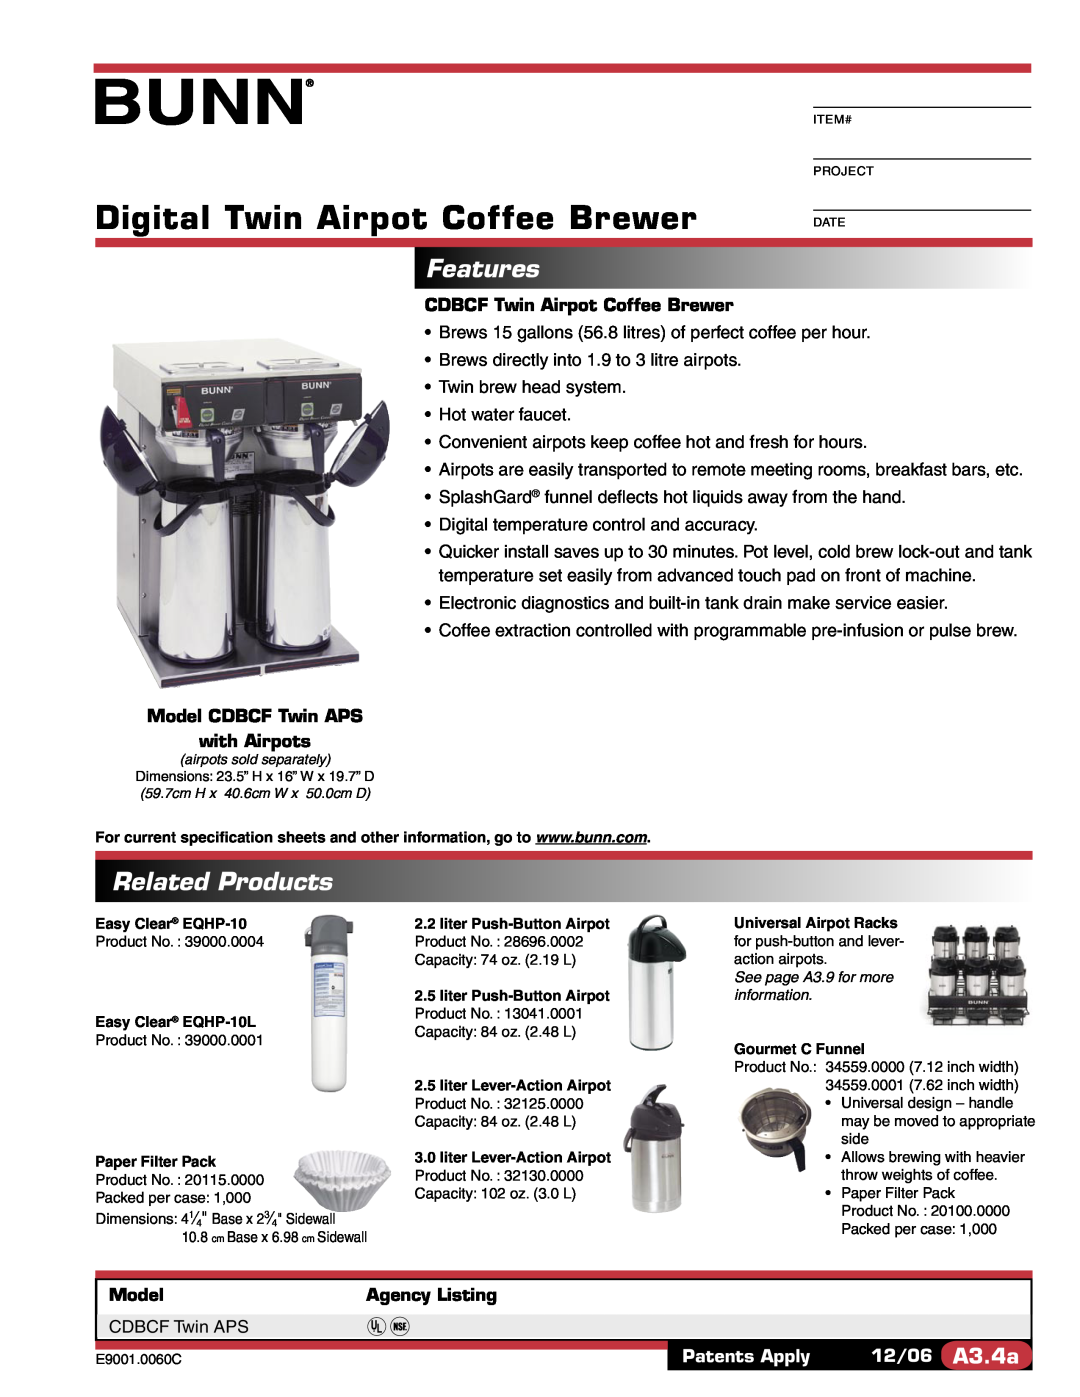 Bunn CDBCF TWIN APS specifications Digital Twin Airpot Coffee Brewer, Features, Related Products, Model, Agency Listing 